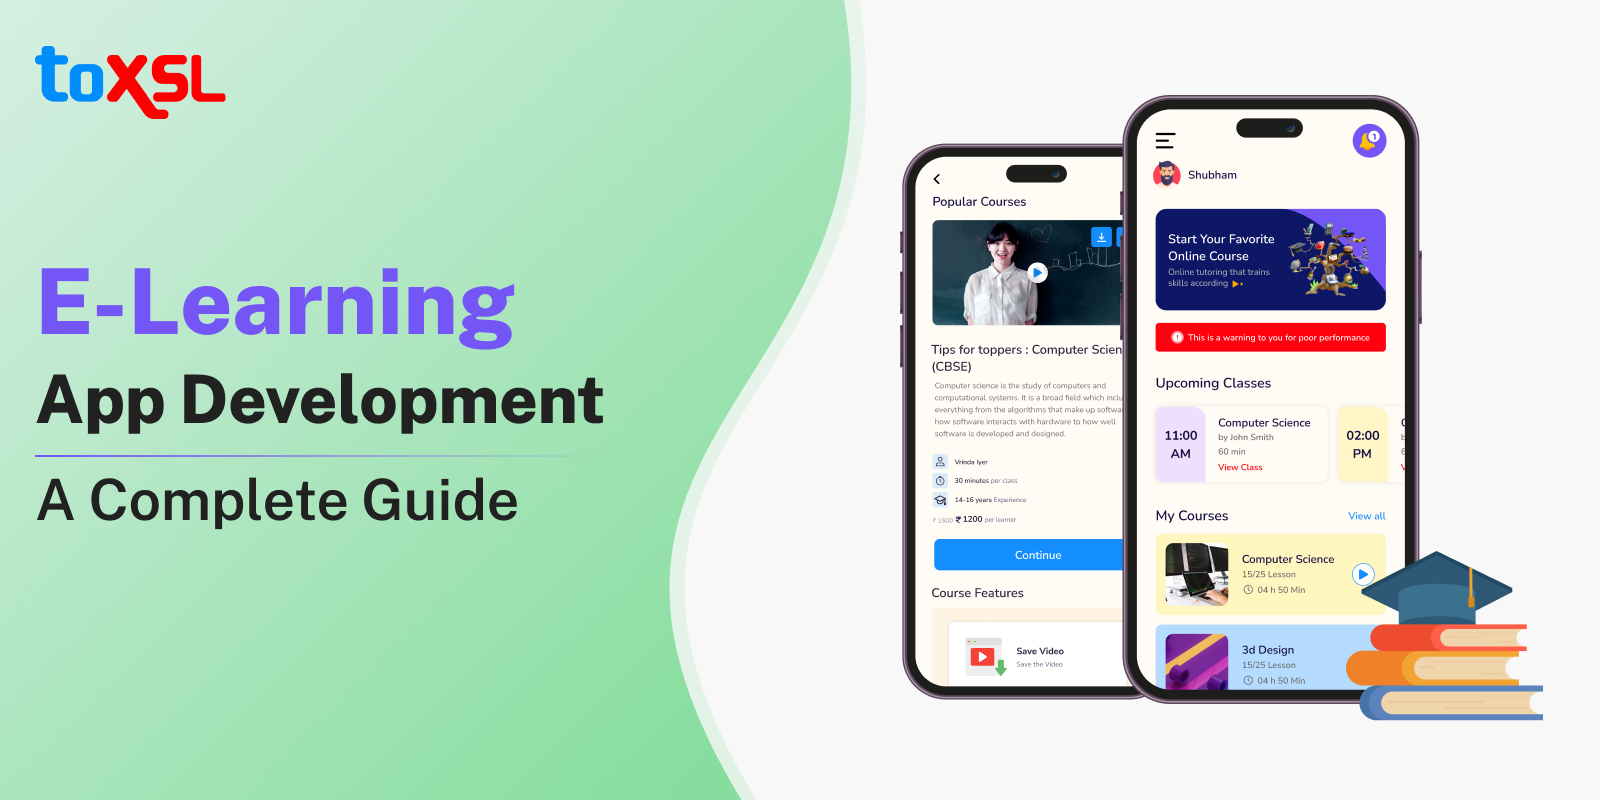 E-Learning App Development: A Complete Guide